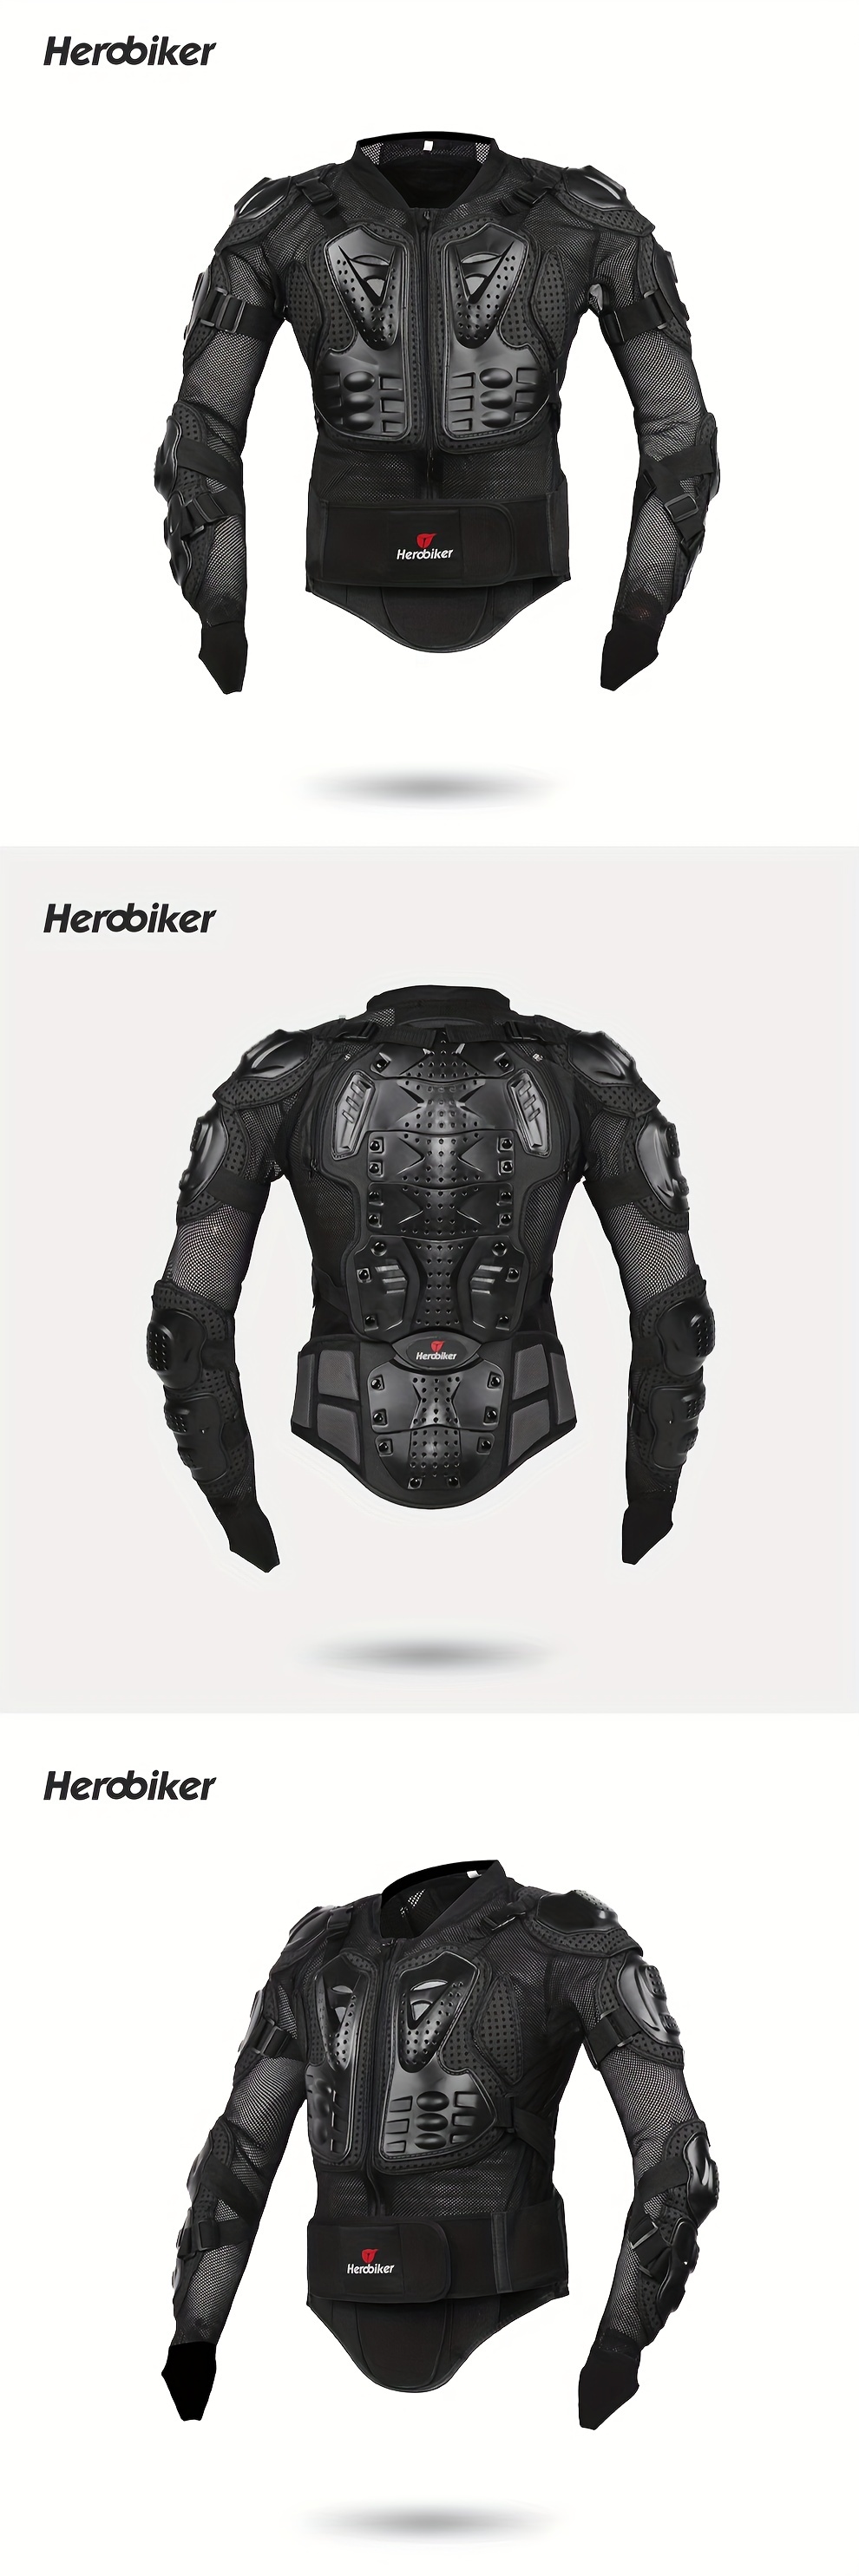 Mens Full Body Armor Protection Jacket For Motocross Enduro Racing 5XL  Turtle Design Each Other Mens Clothing Clothing From Besttfn, $19.23